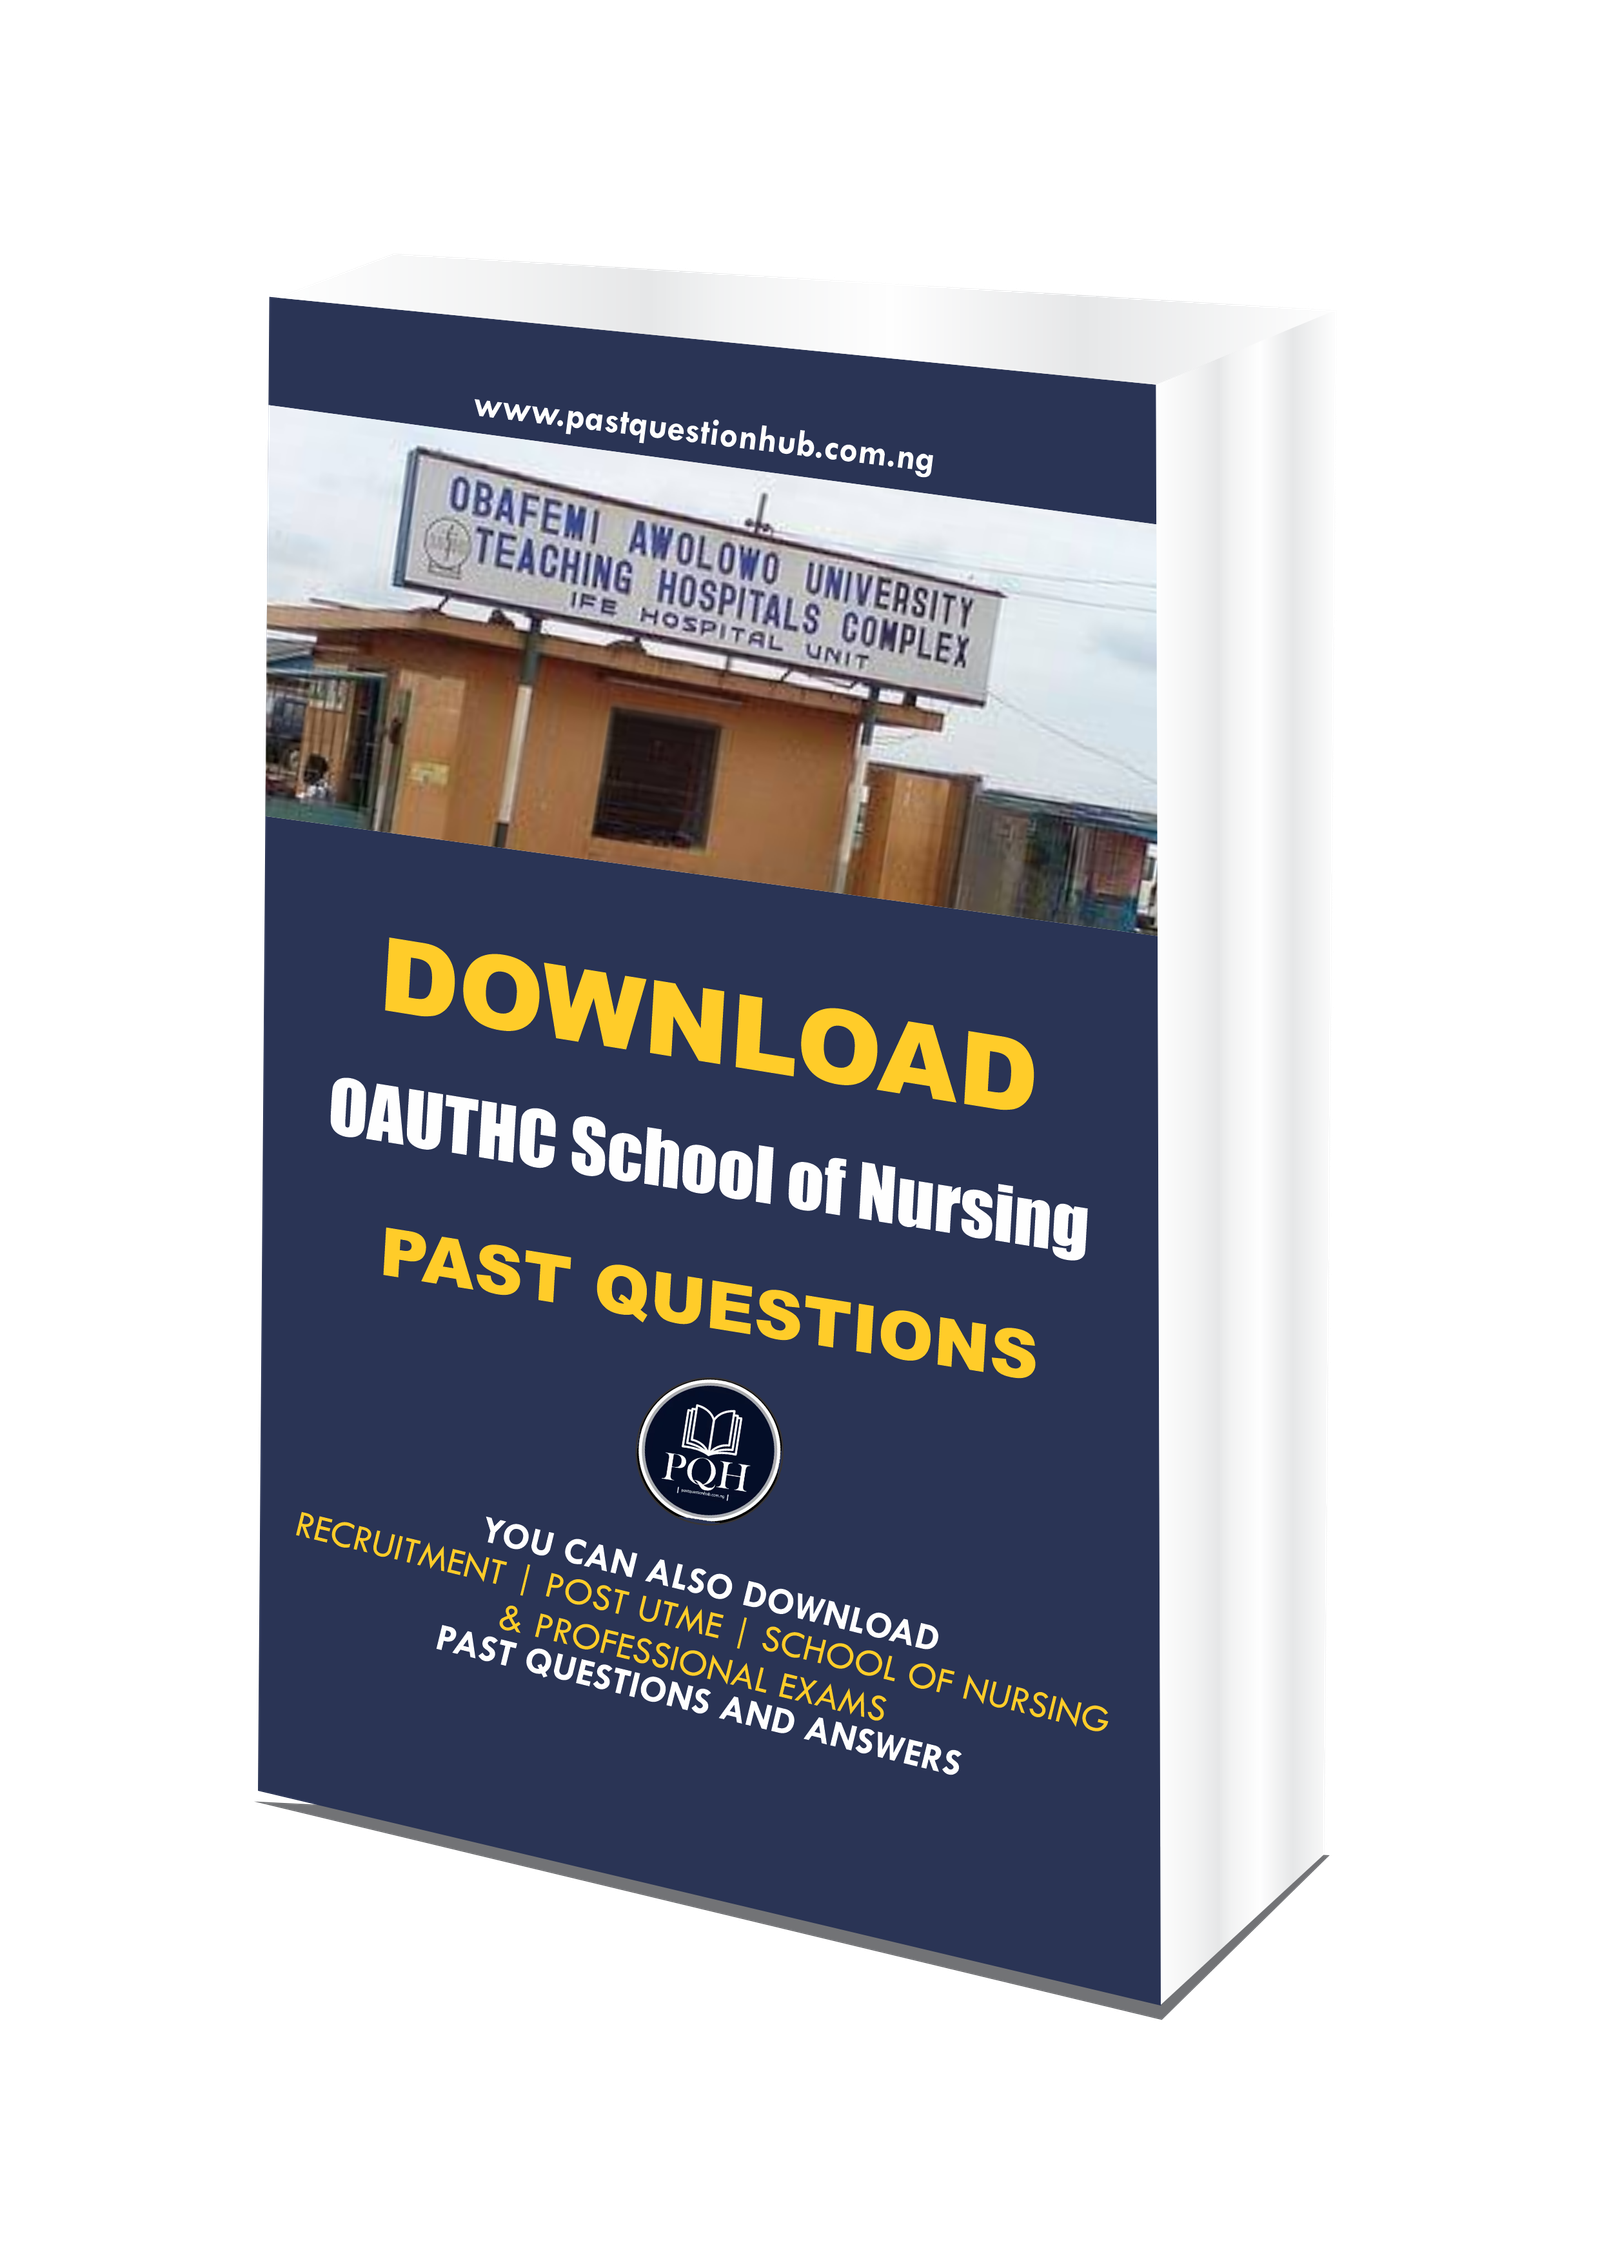 OAUTHC School of Nursing Past Questions and Answers PDF